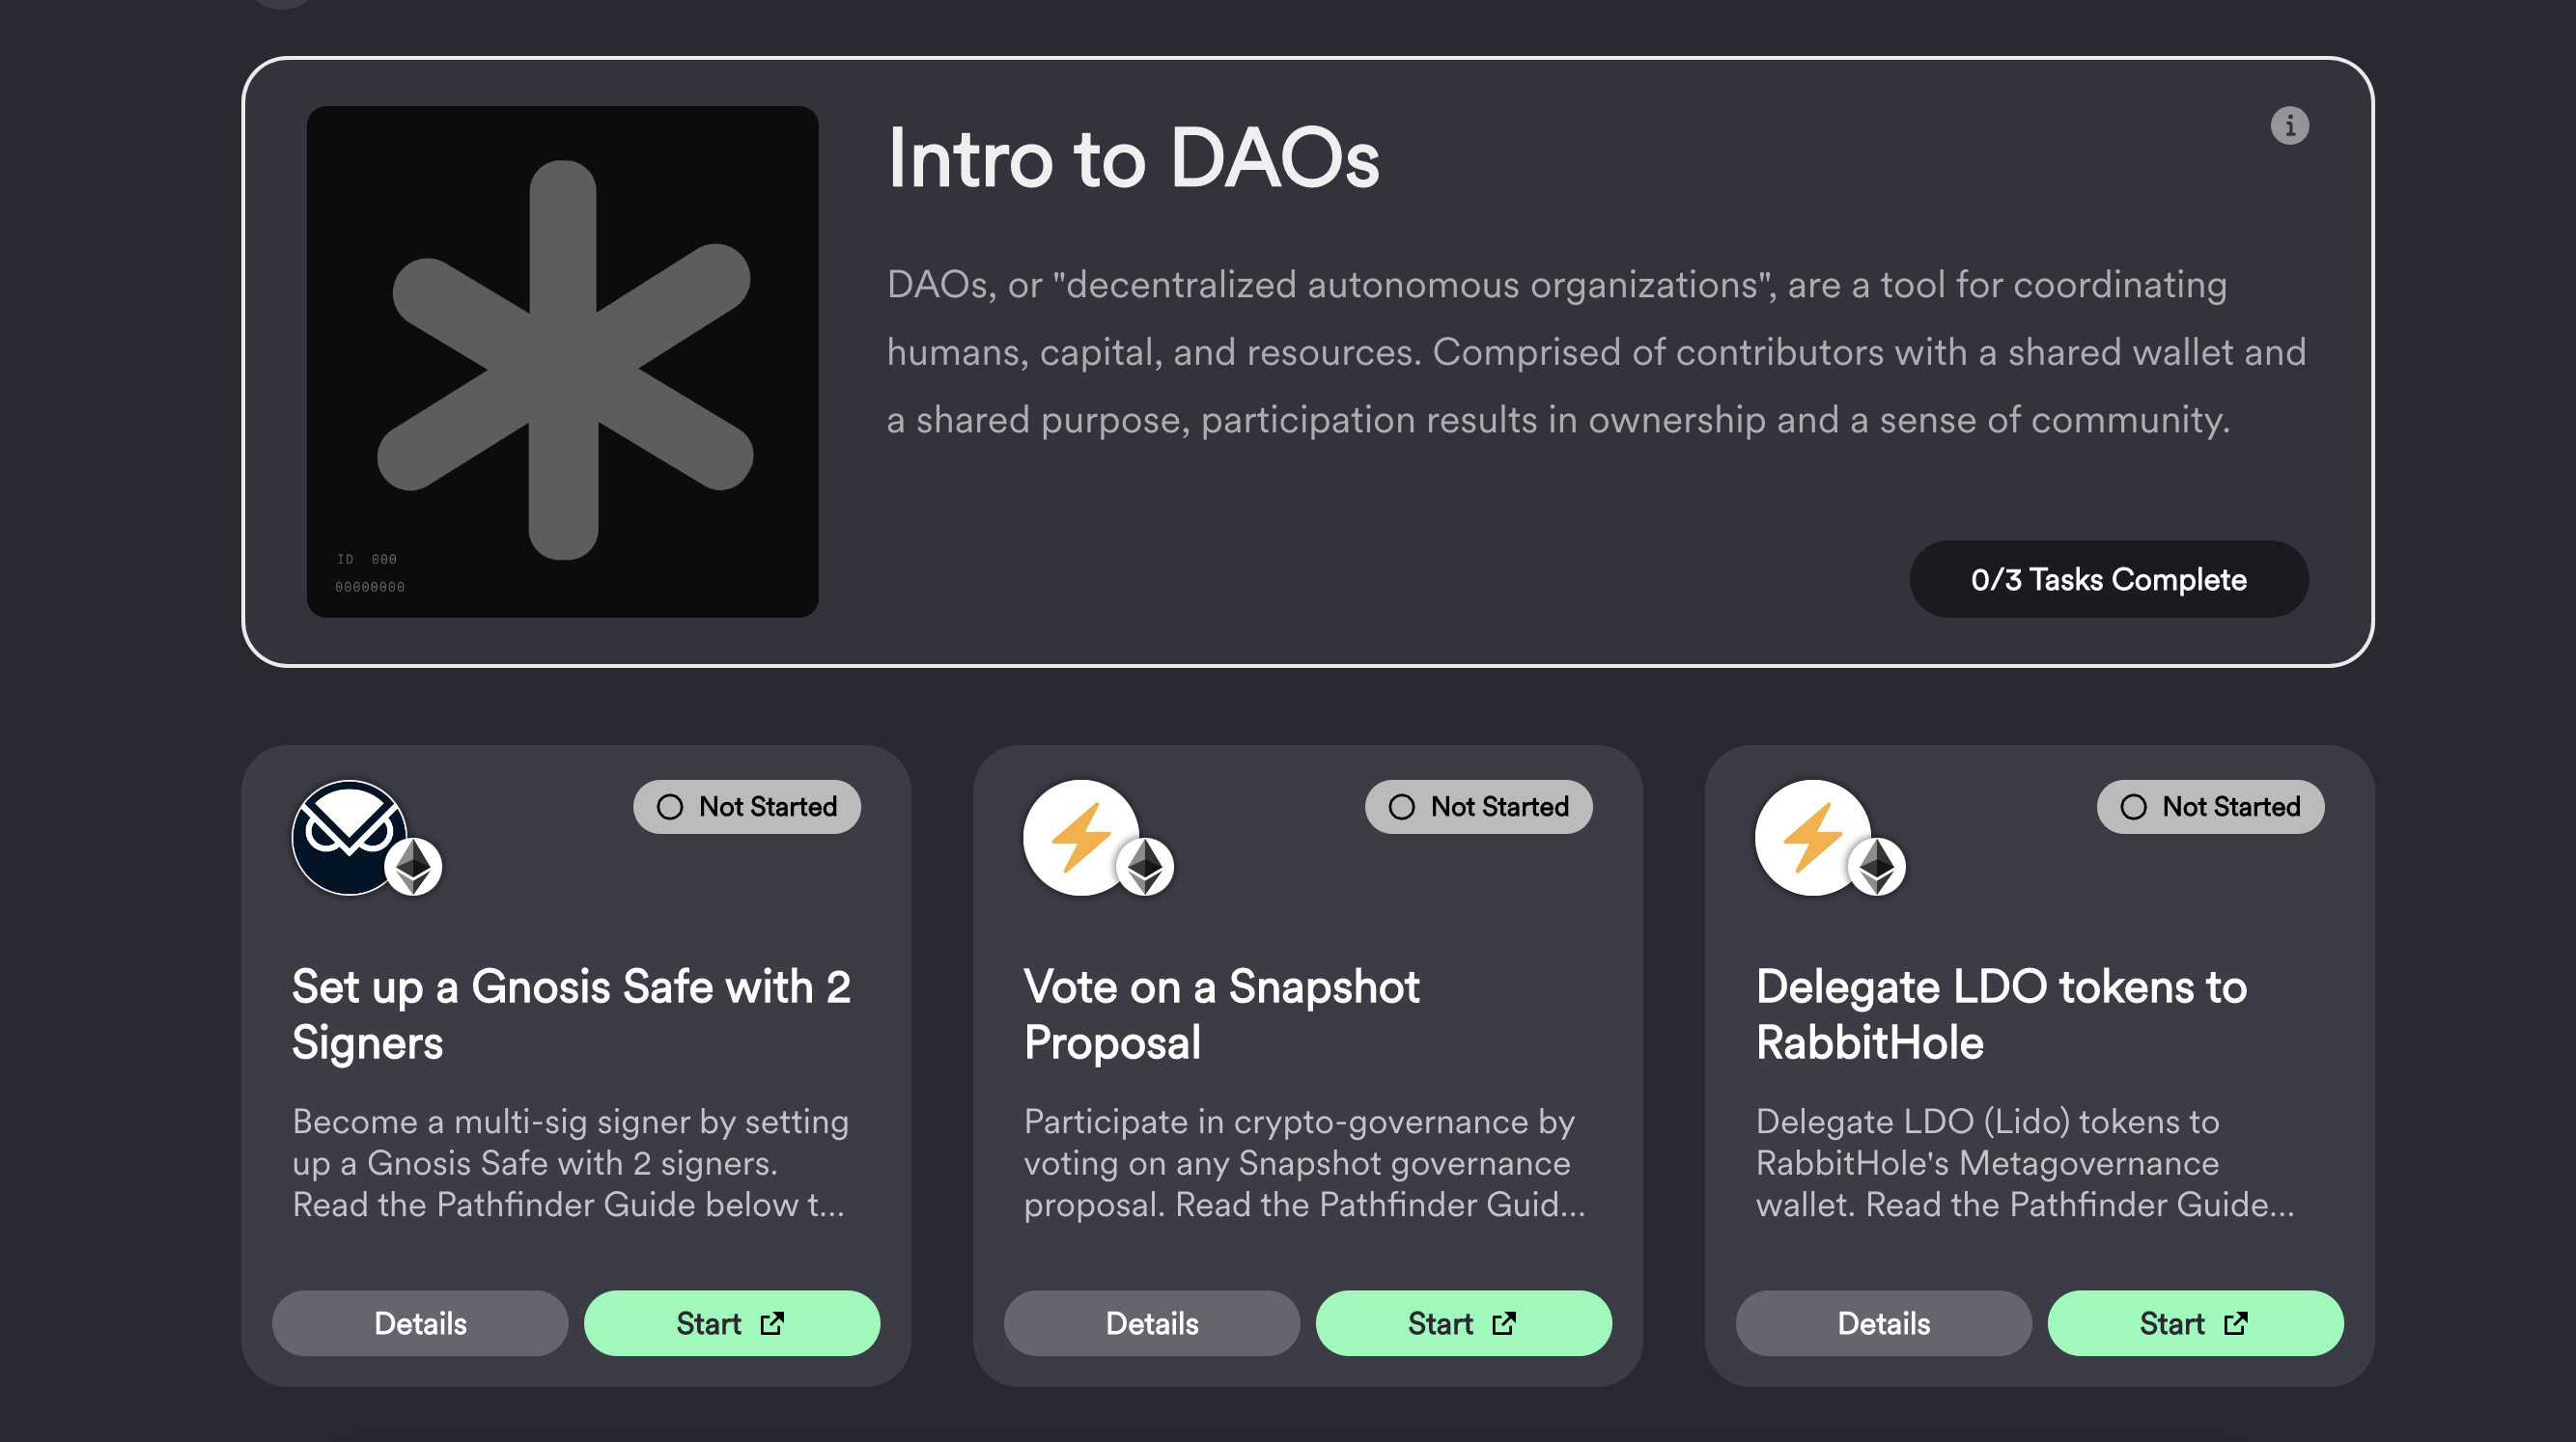 Intro to DAOs includes a redemption for voting on Snapshot